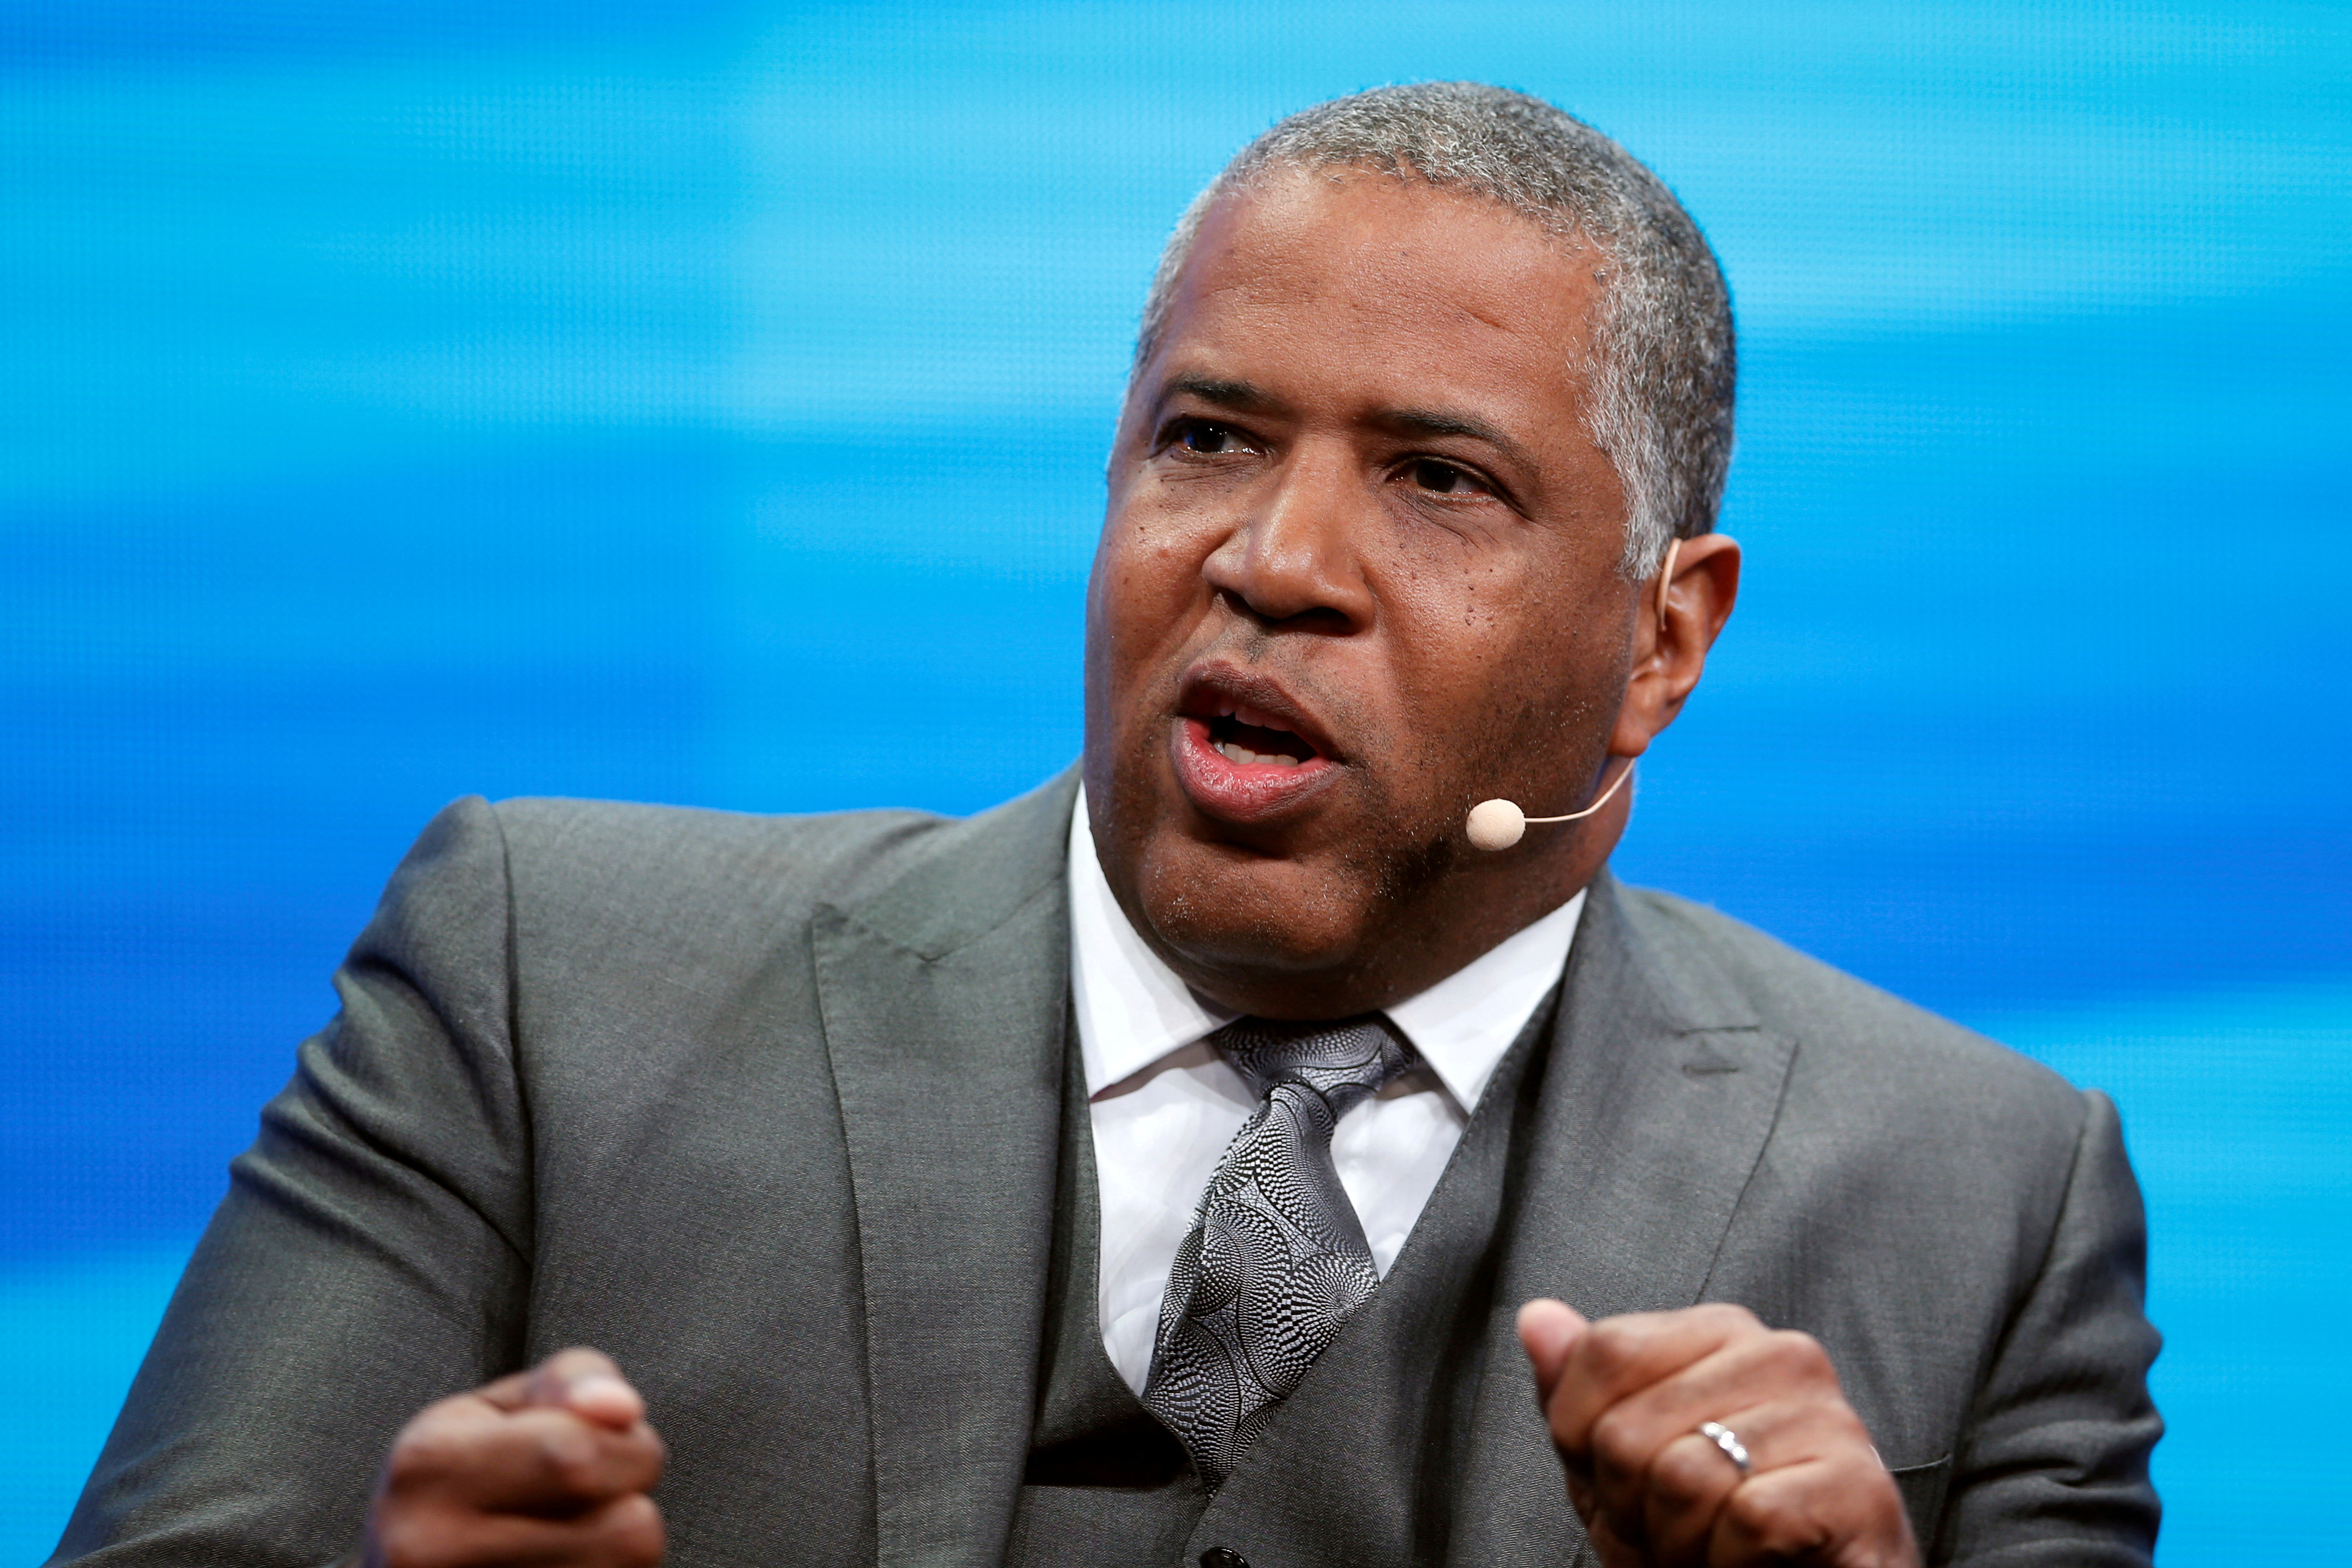 Robert Smith, founder, chair and CEO of Vista Equity Partners, speaks at the Milken Institute Global Conference in Beverly Hills